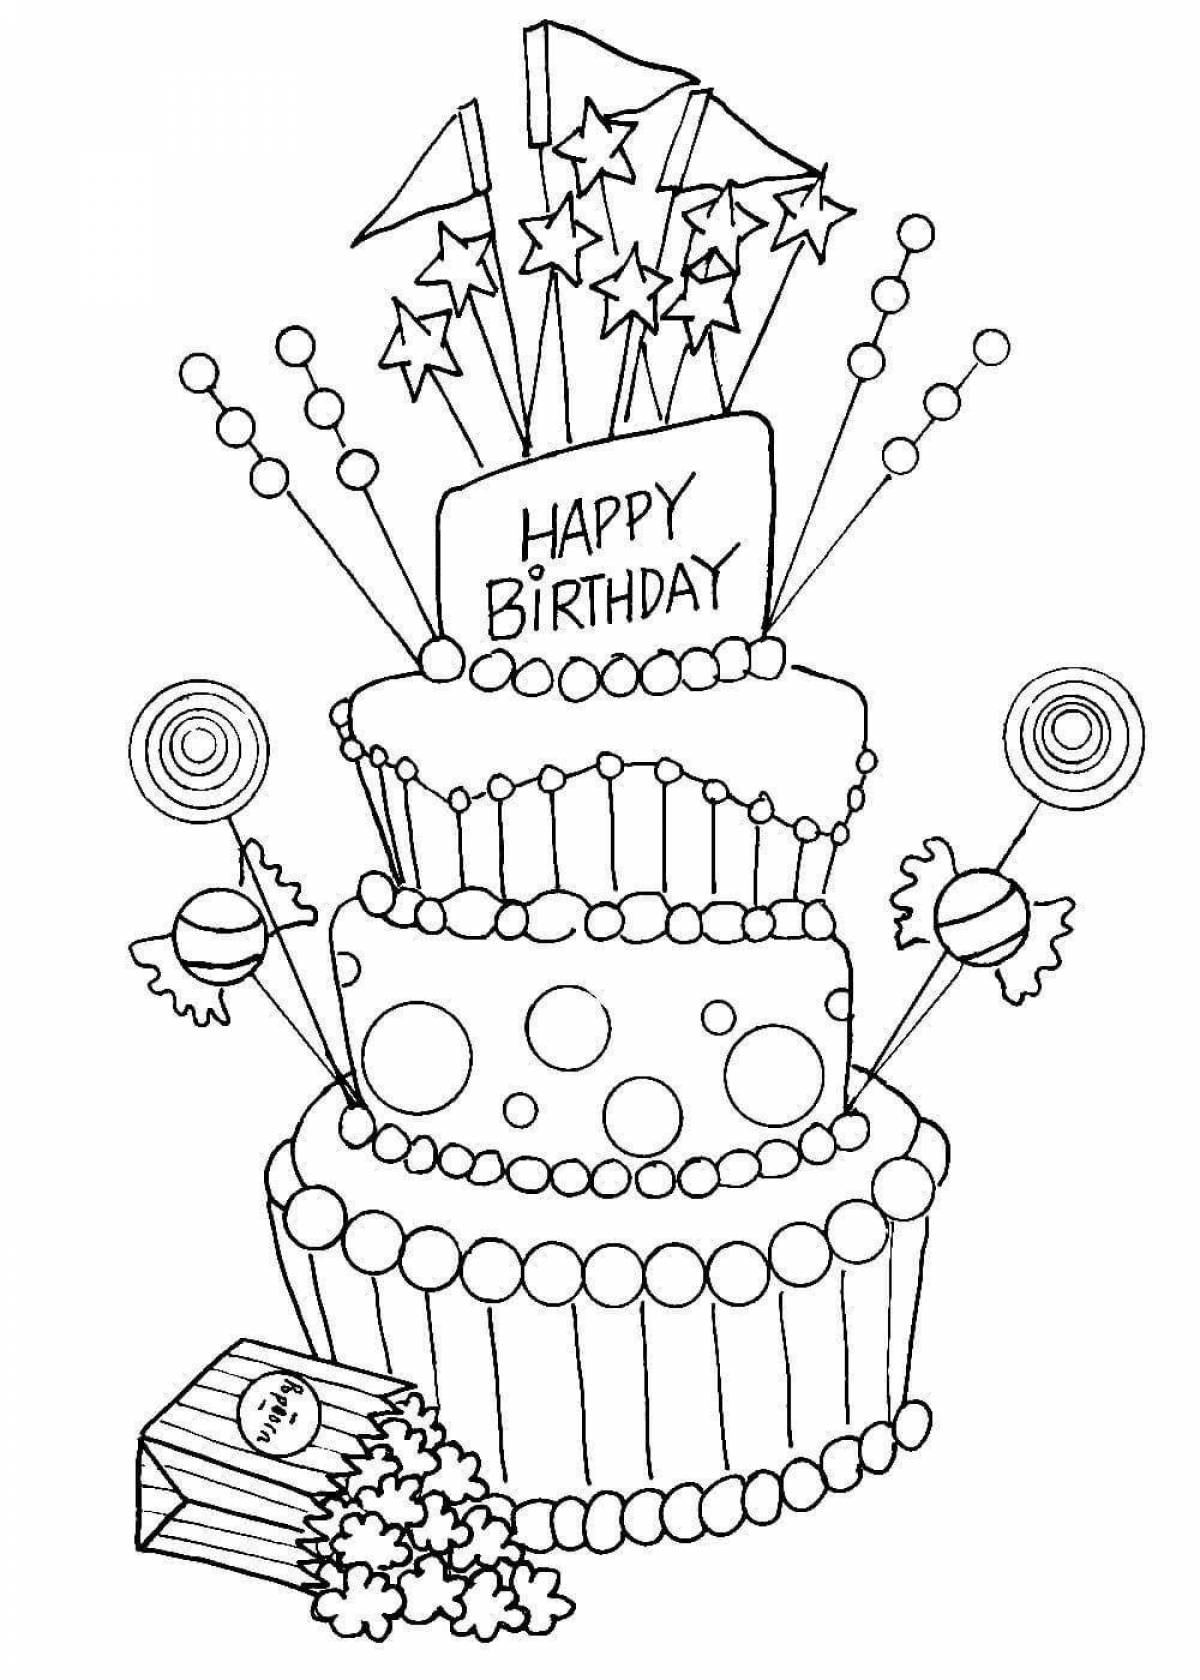 Happy godmother's birthday coloring page